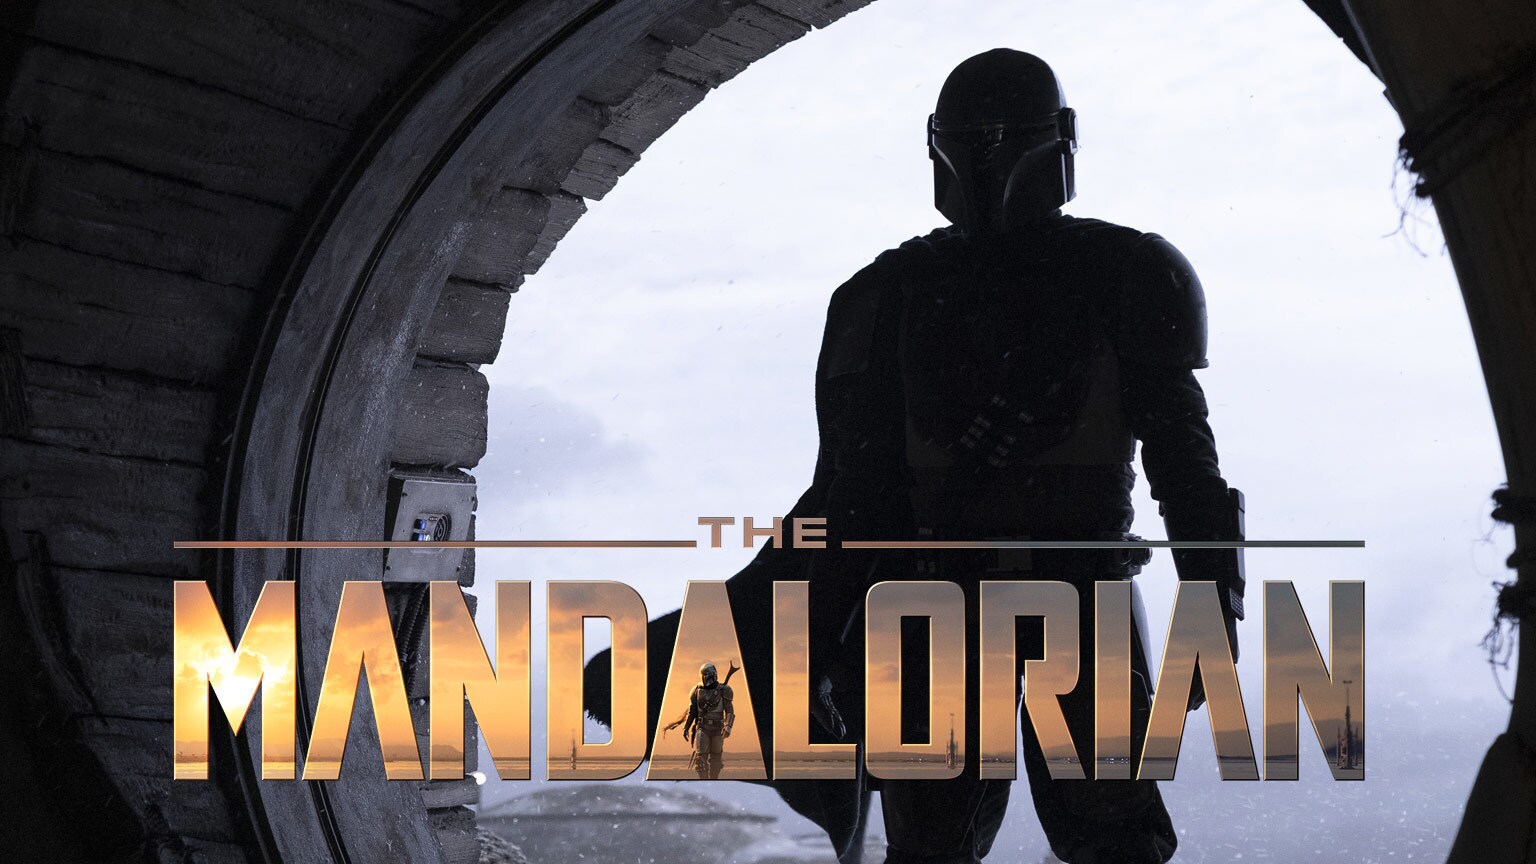 SWCC 2019: 9 Things We Learned from The Mandalorian Panel